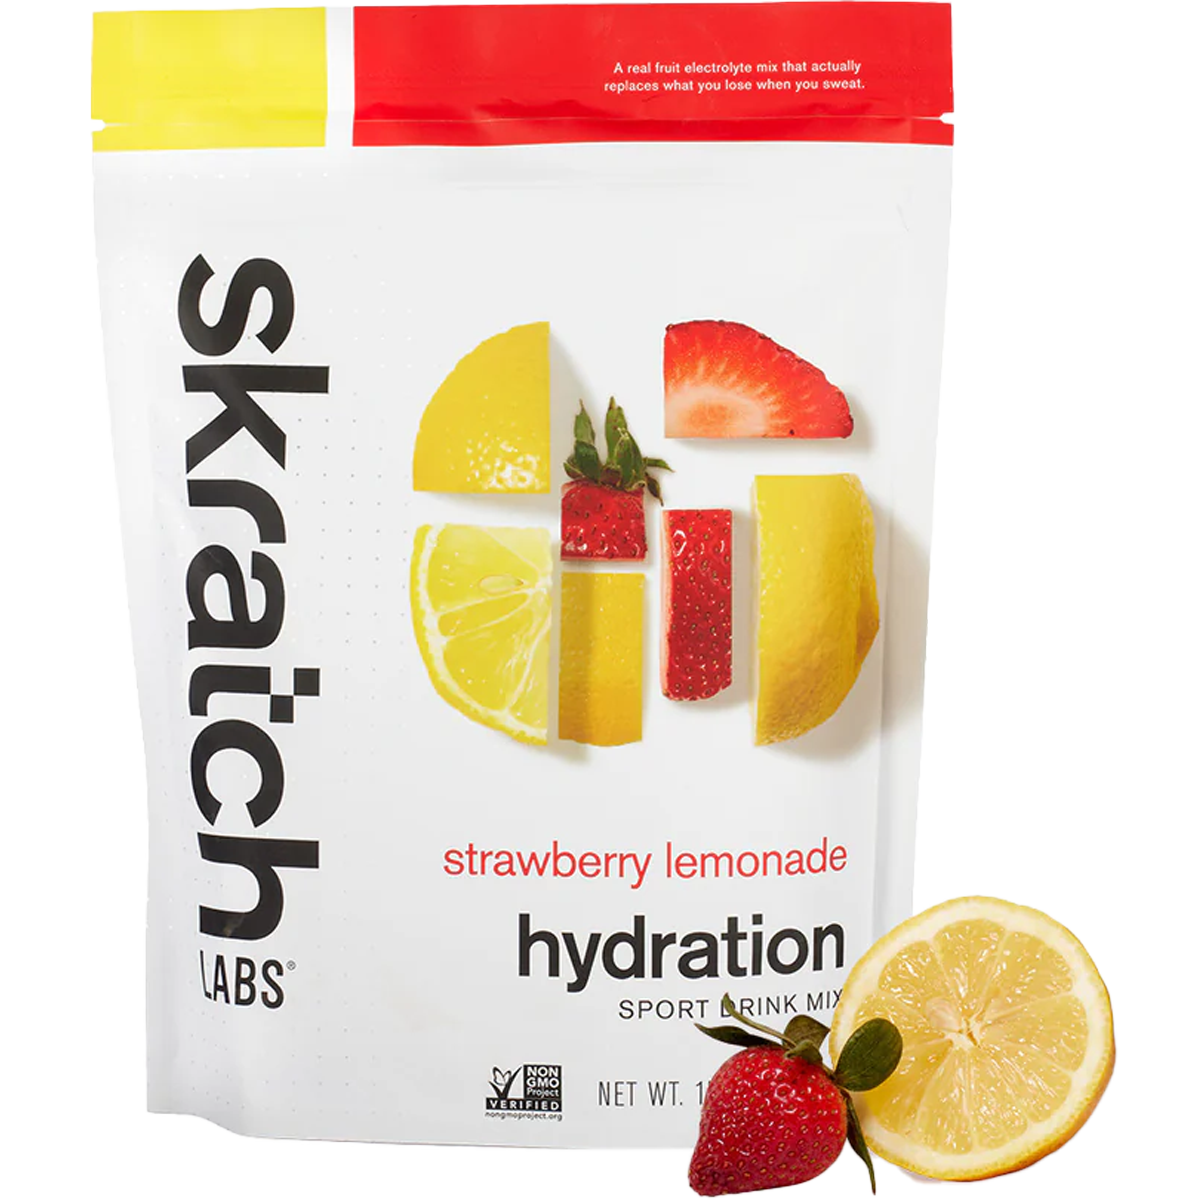 Buy SKRATCH LABS Products at Whole Foods Market